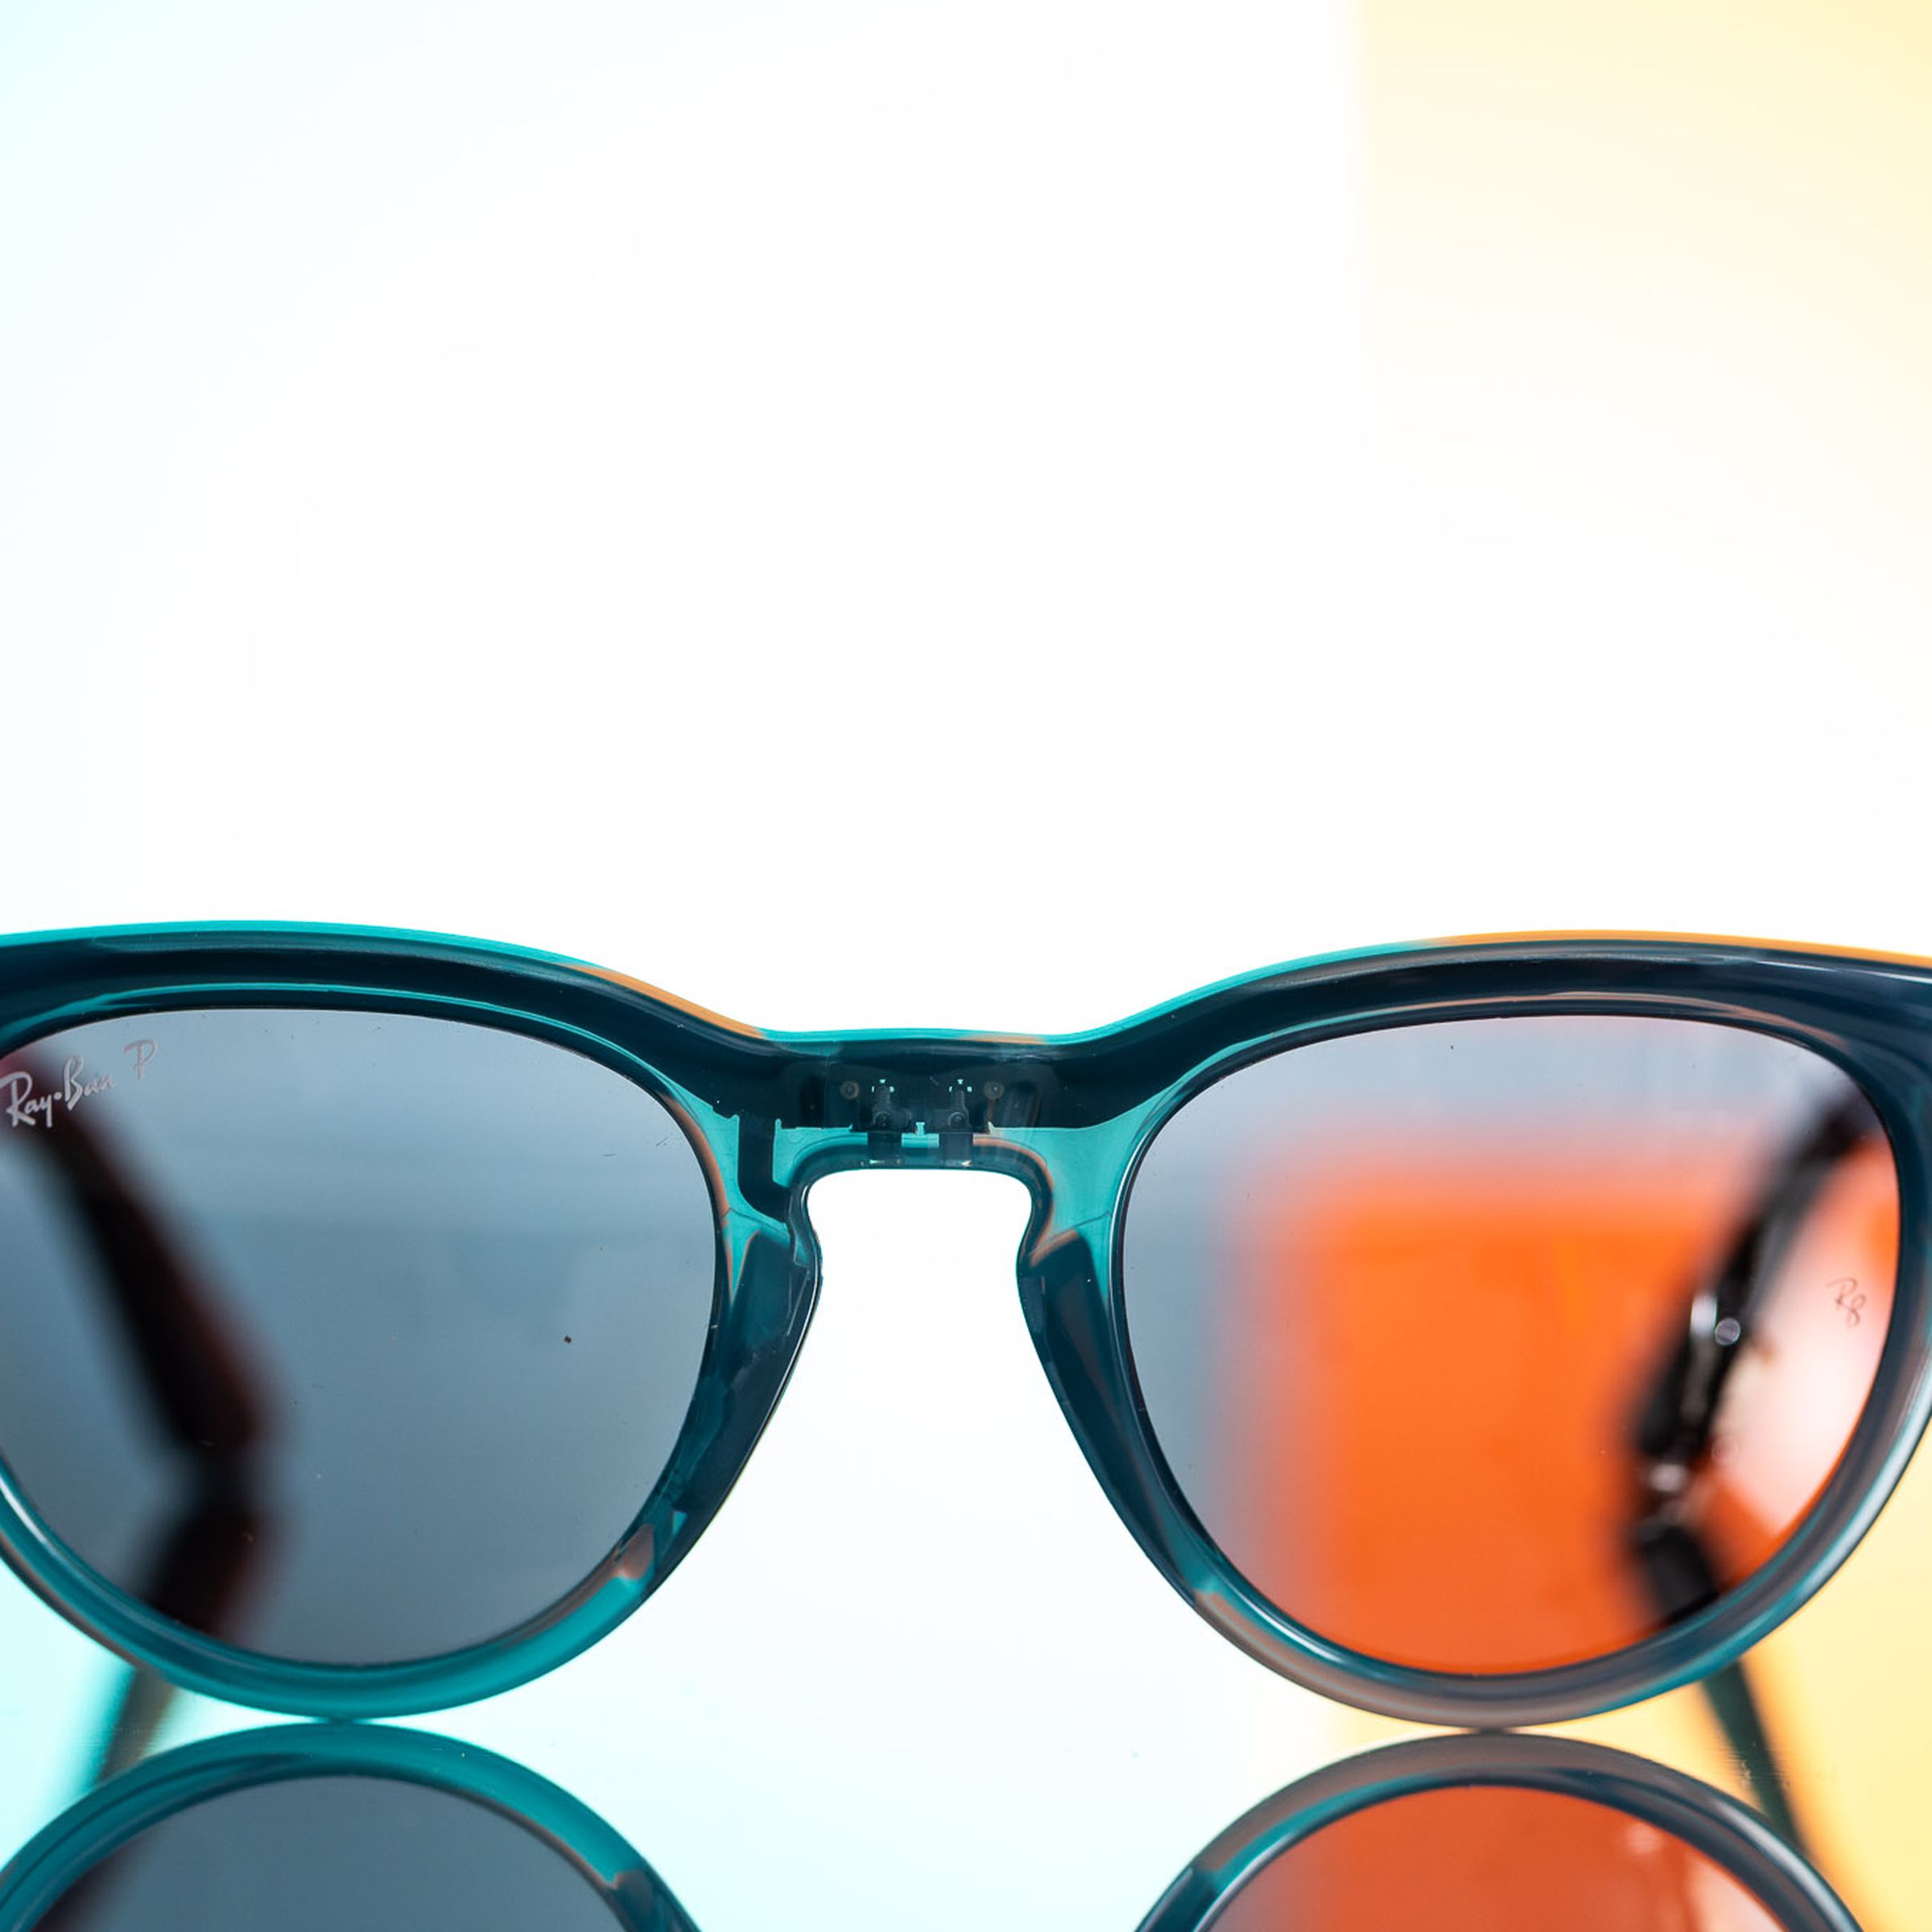 Front view of the Ray-Ban Meta smart glasses on a colorful background